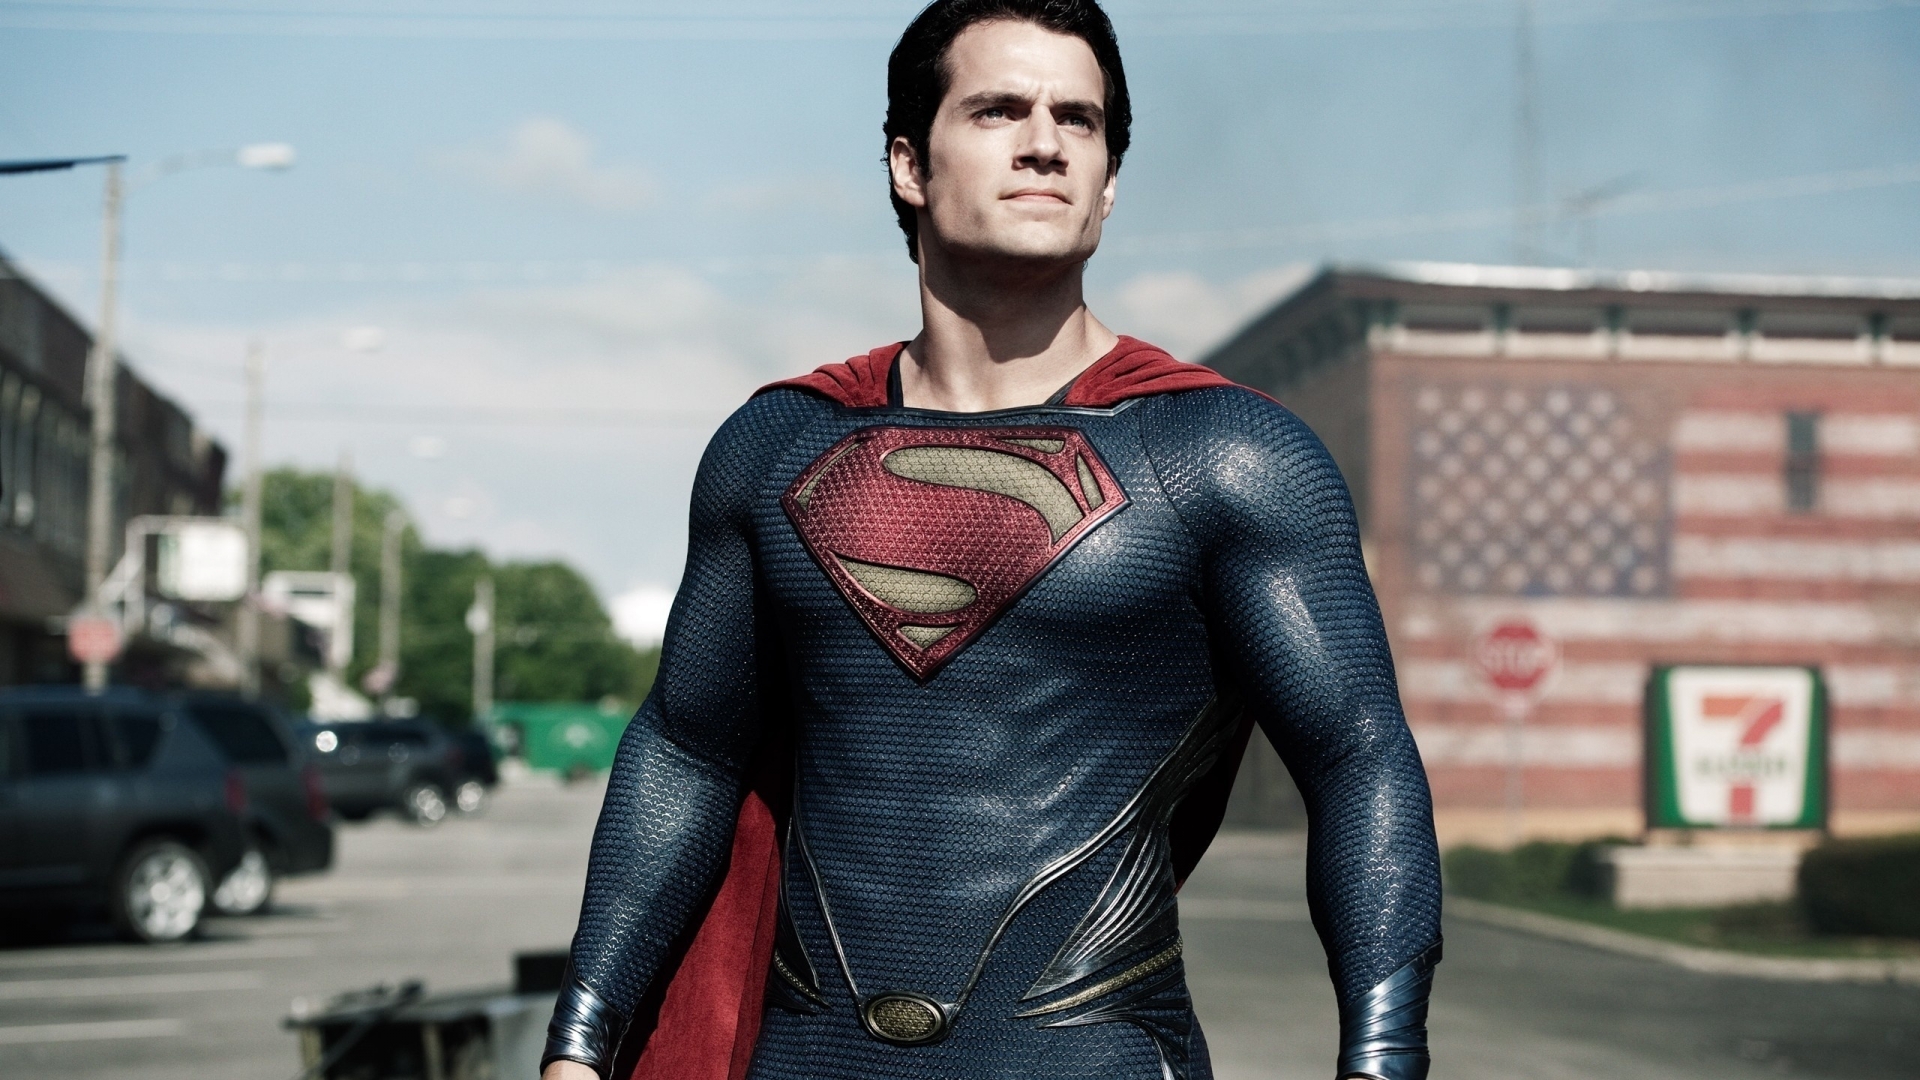 Man of Steel Pose for 1920 x 1080 HDTV 1080p resolution